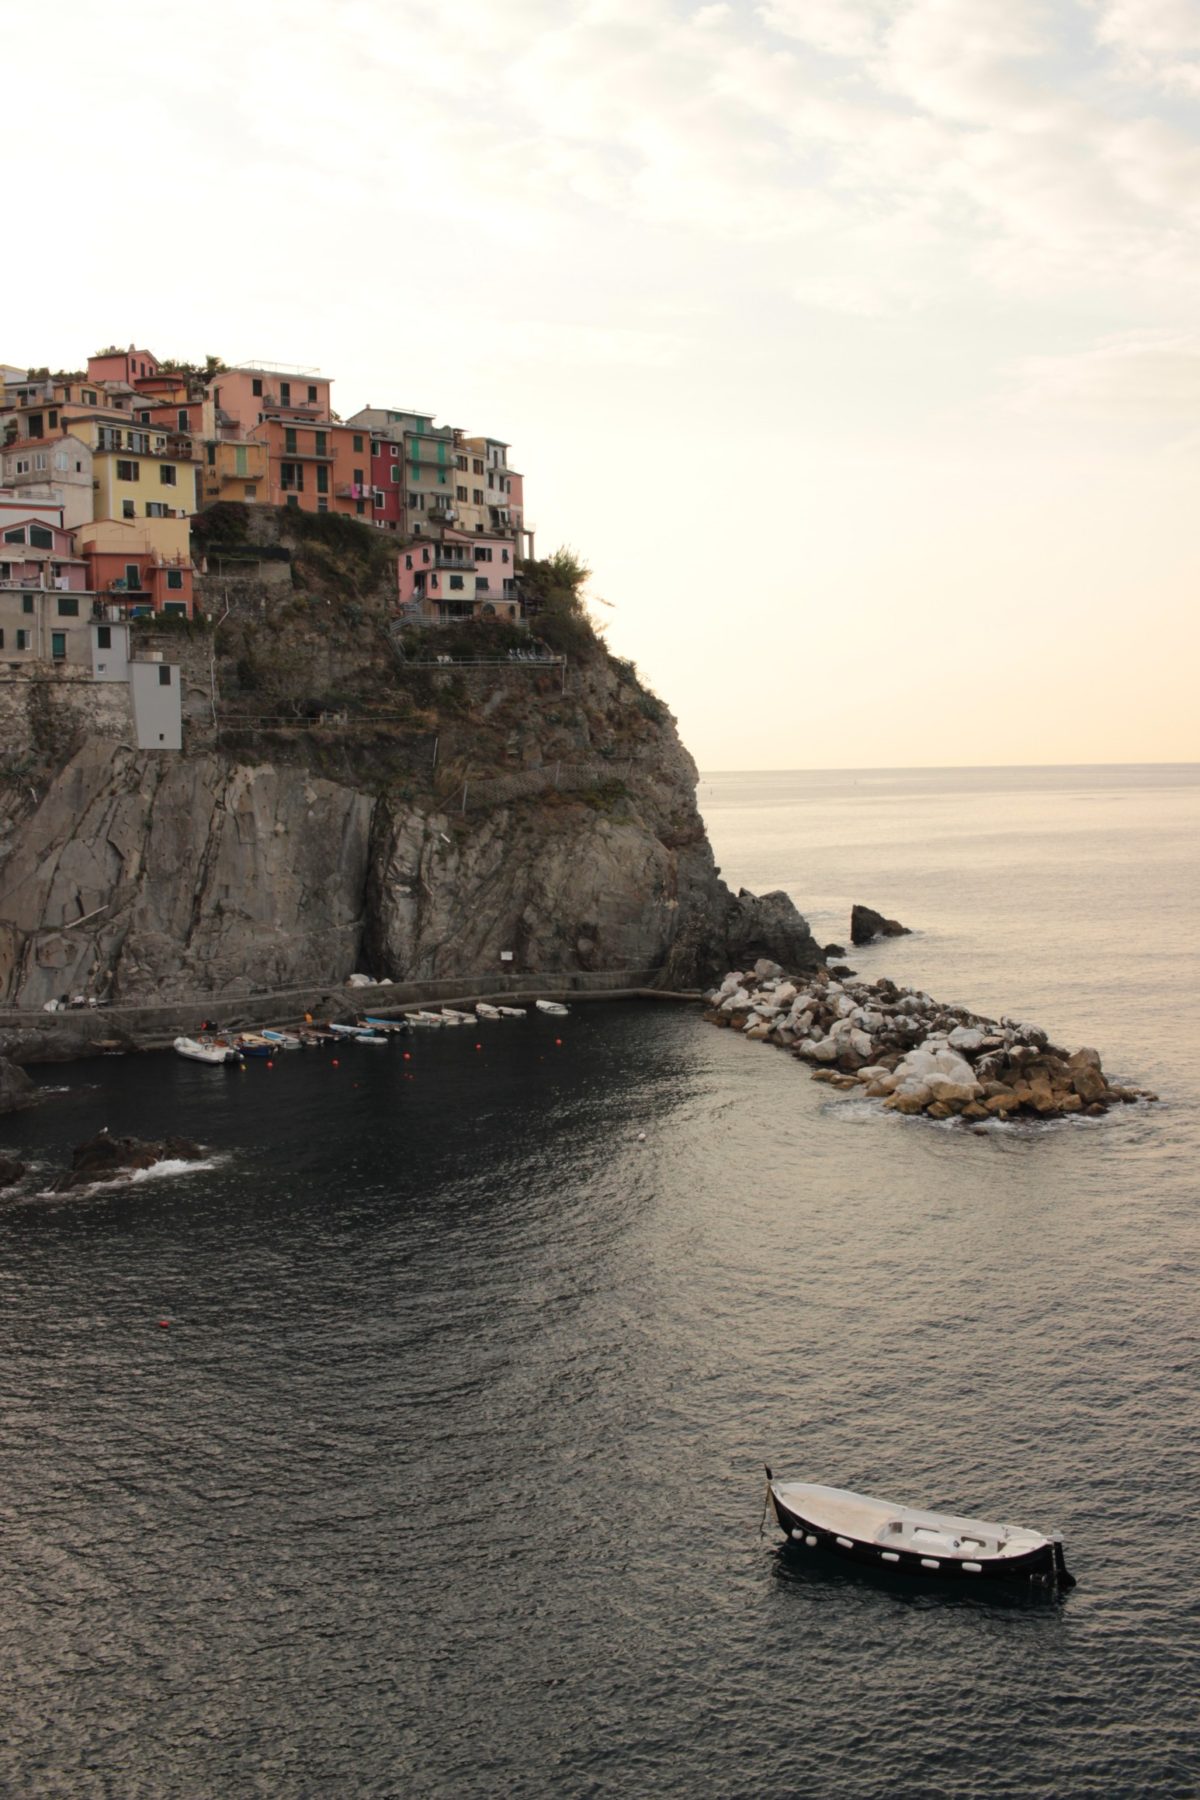 Another view of Manarola's Sunrise